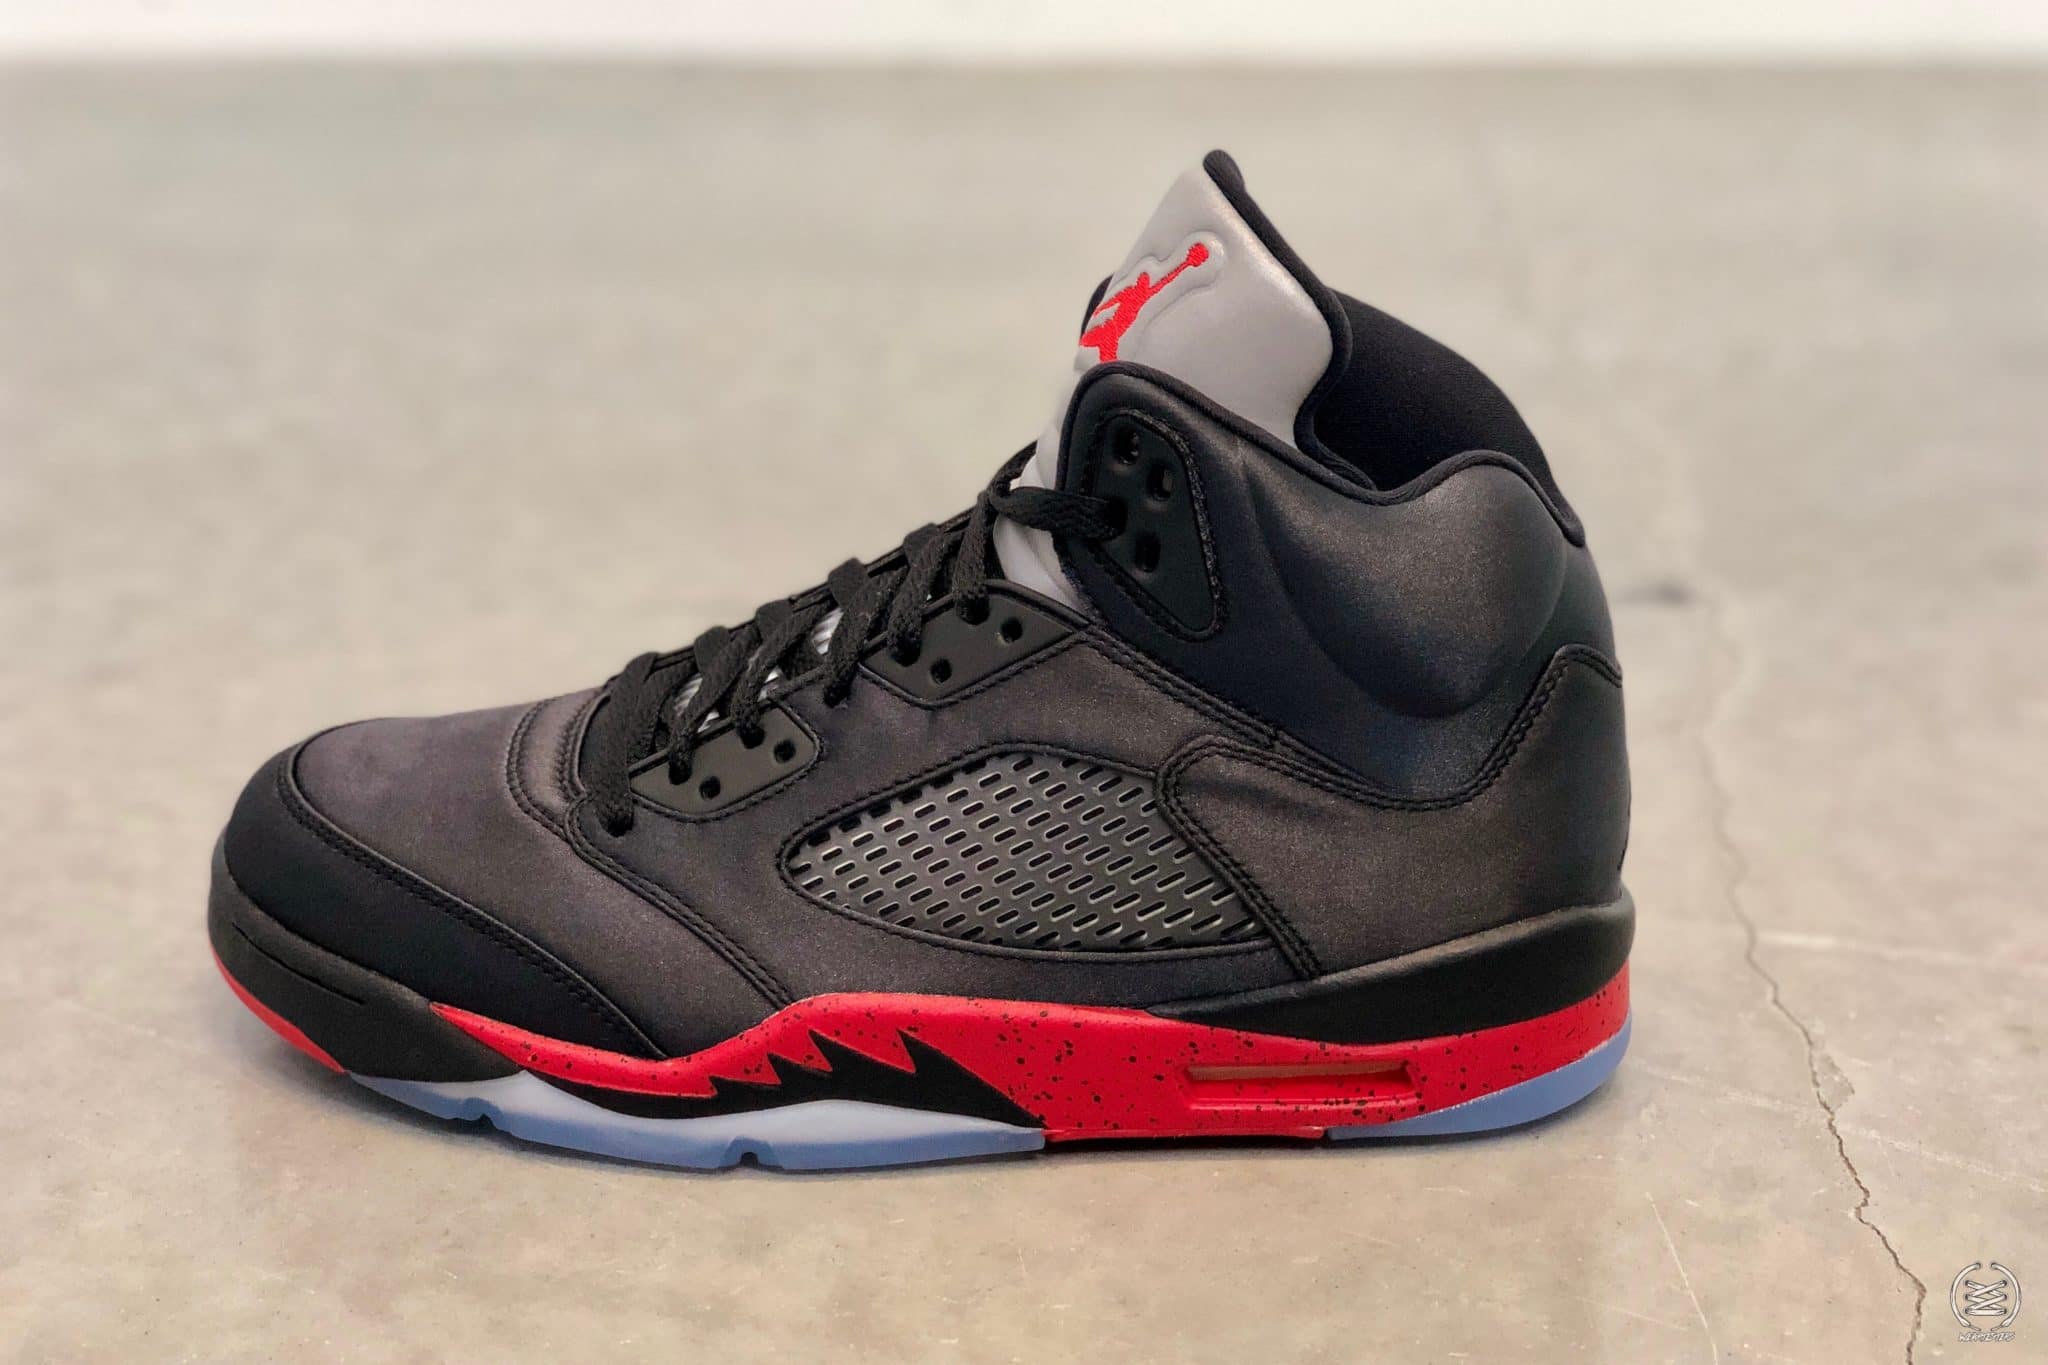 The Air Jordan 5 Satin Release Date Has Been Moved Up - WearTesters